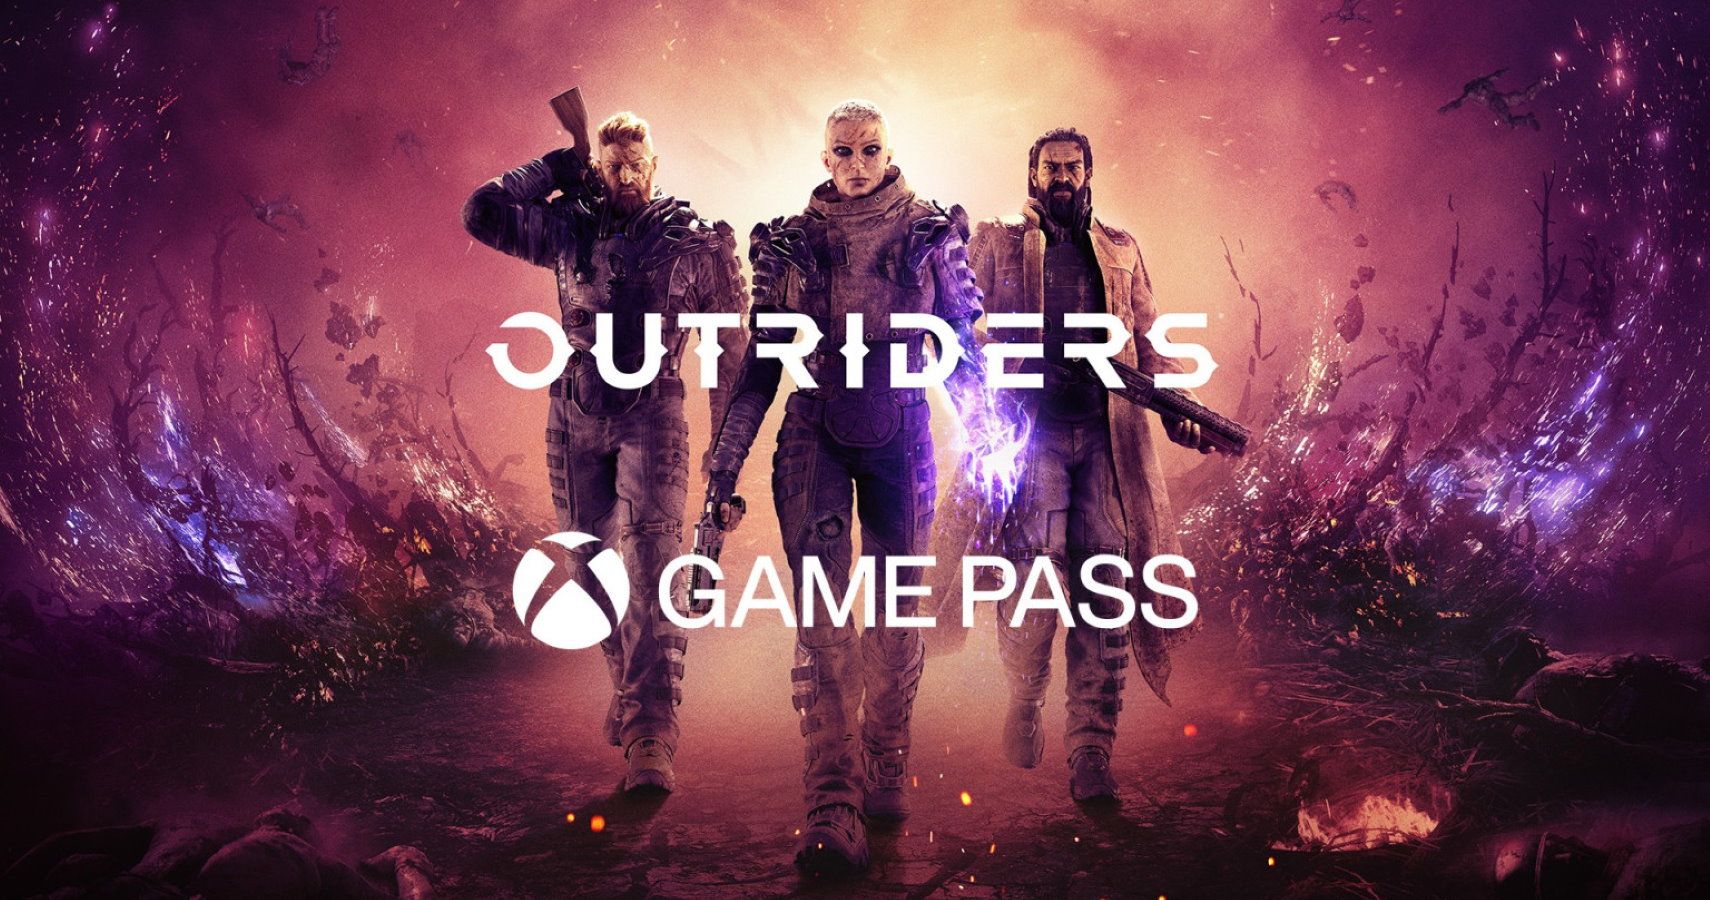 Outrdiers Game Pass